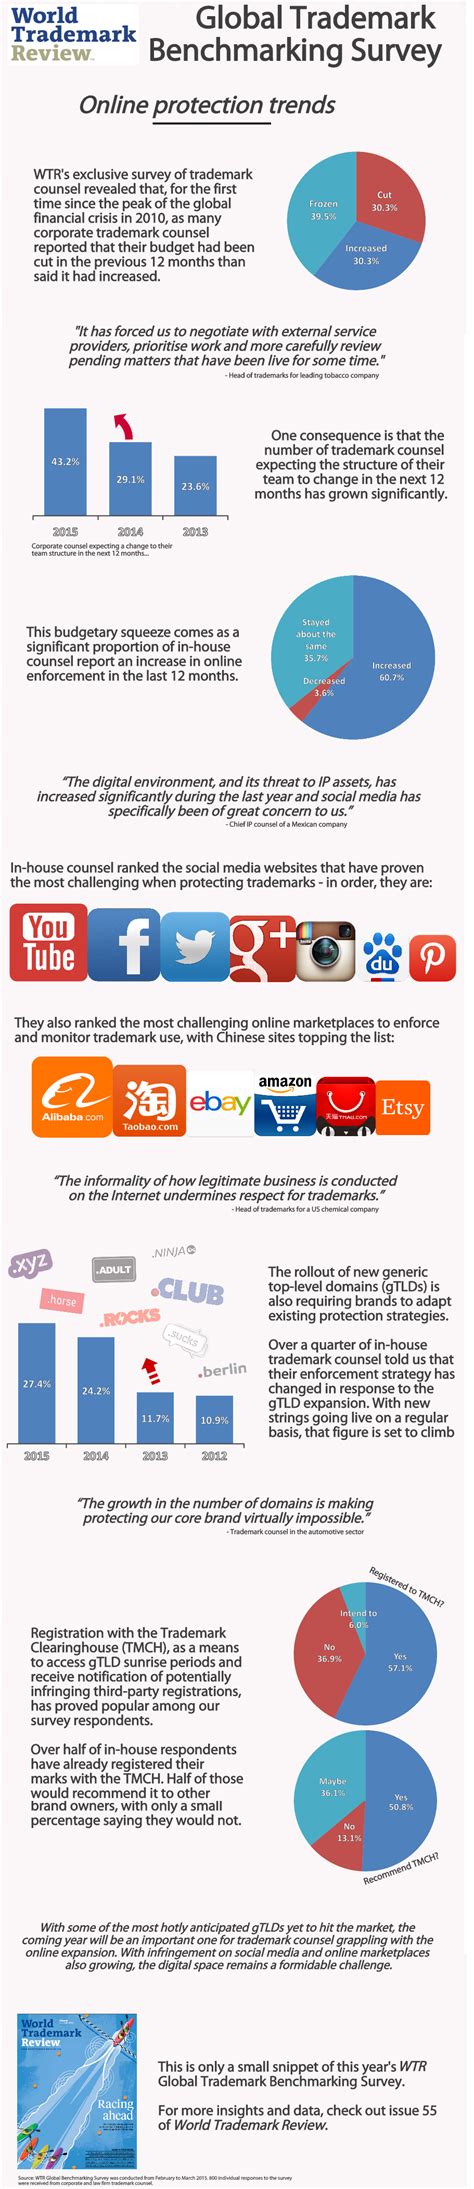 Online Protection Trends An Infographic Wtr Blog Infographic